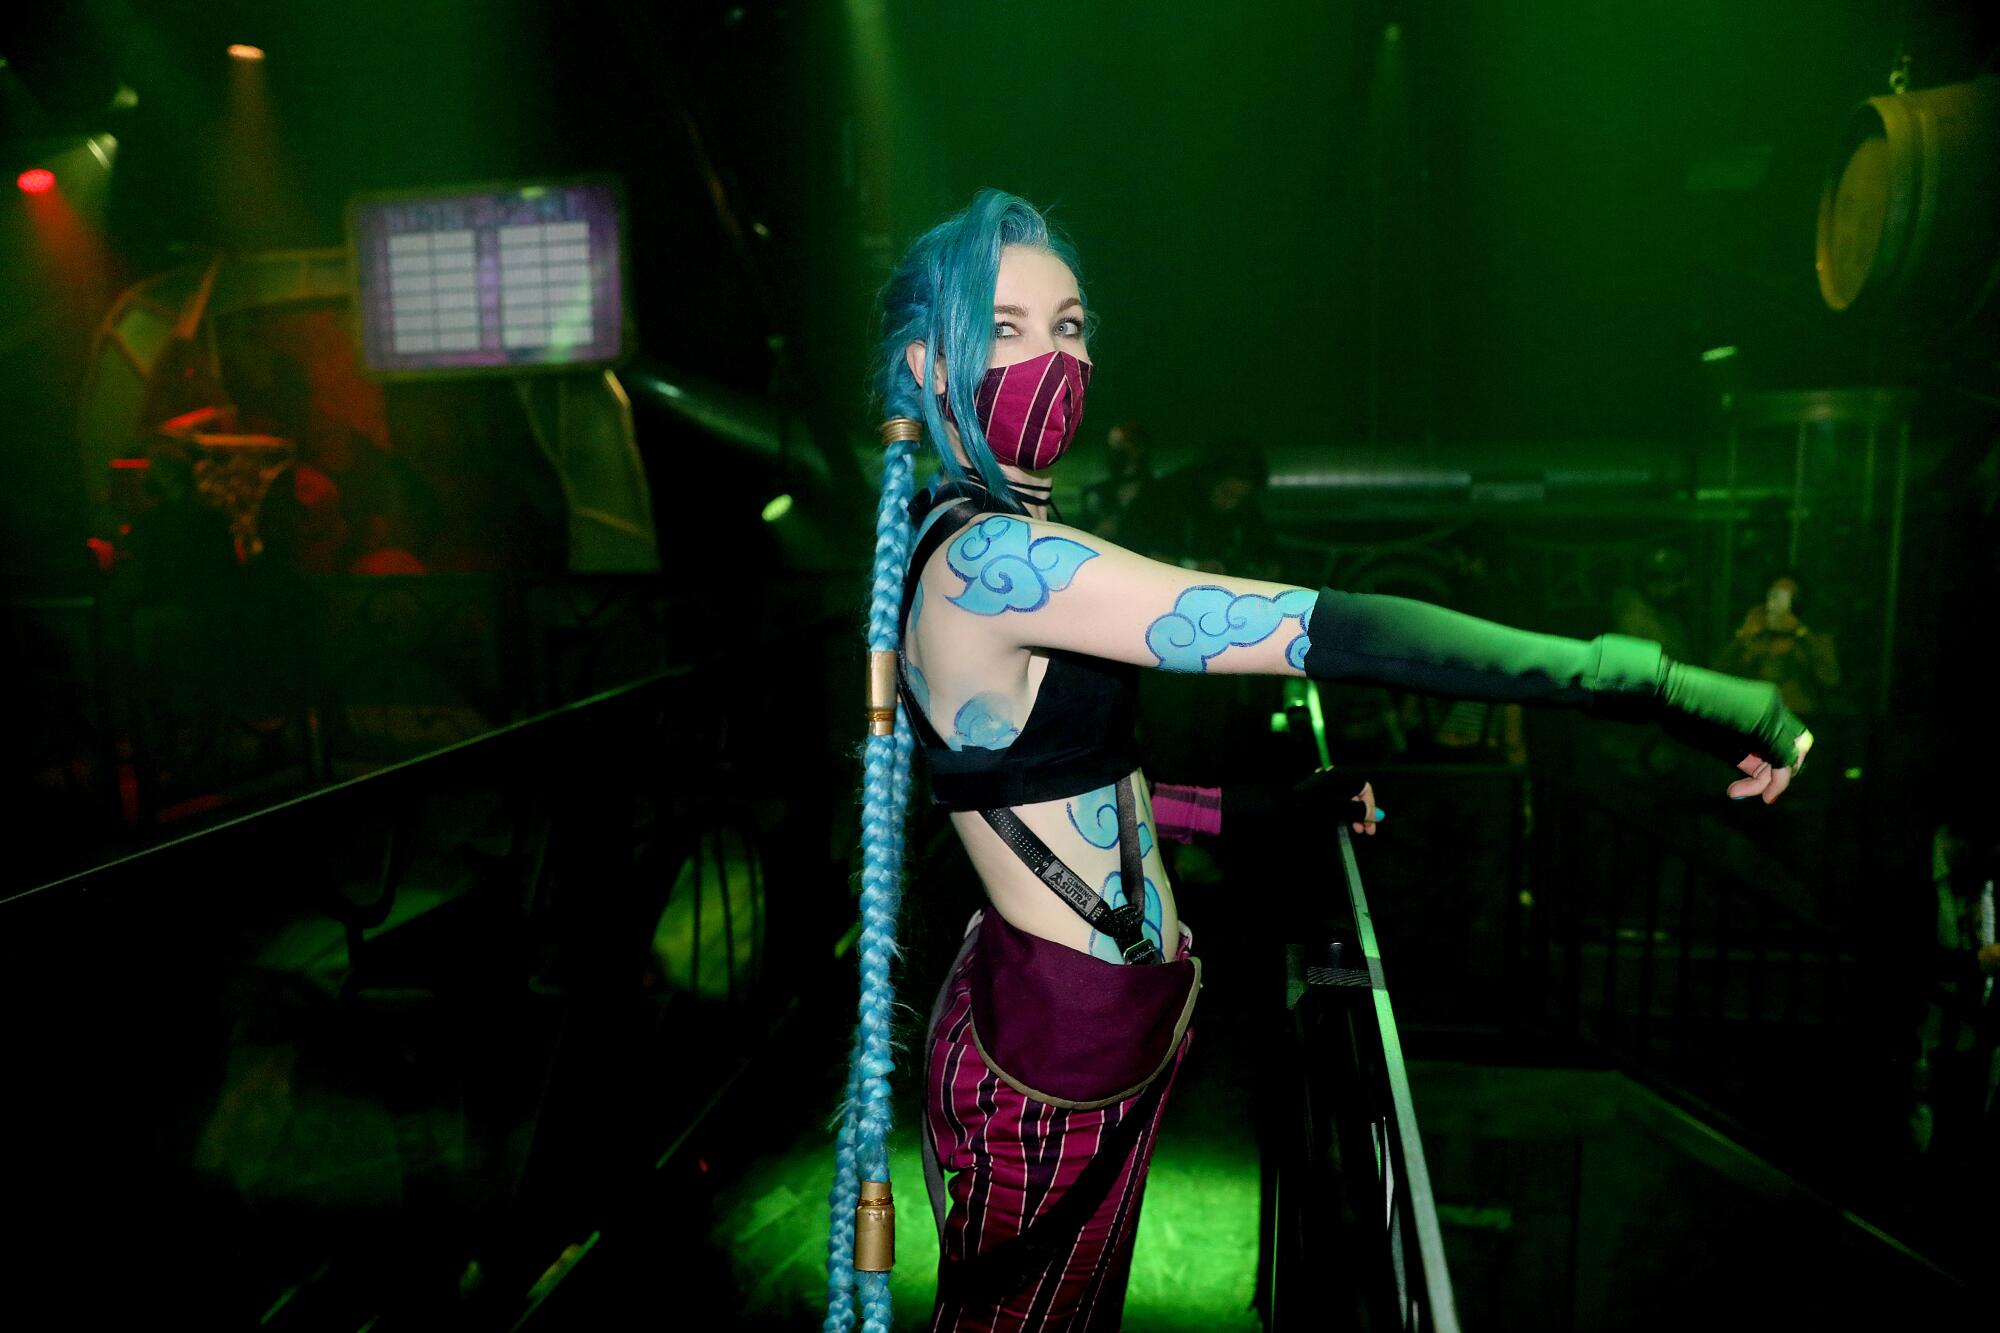 A women with long blue braids in a video game-inspired costume.